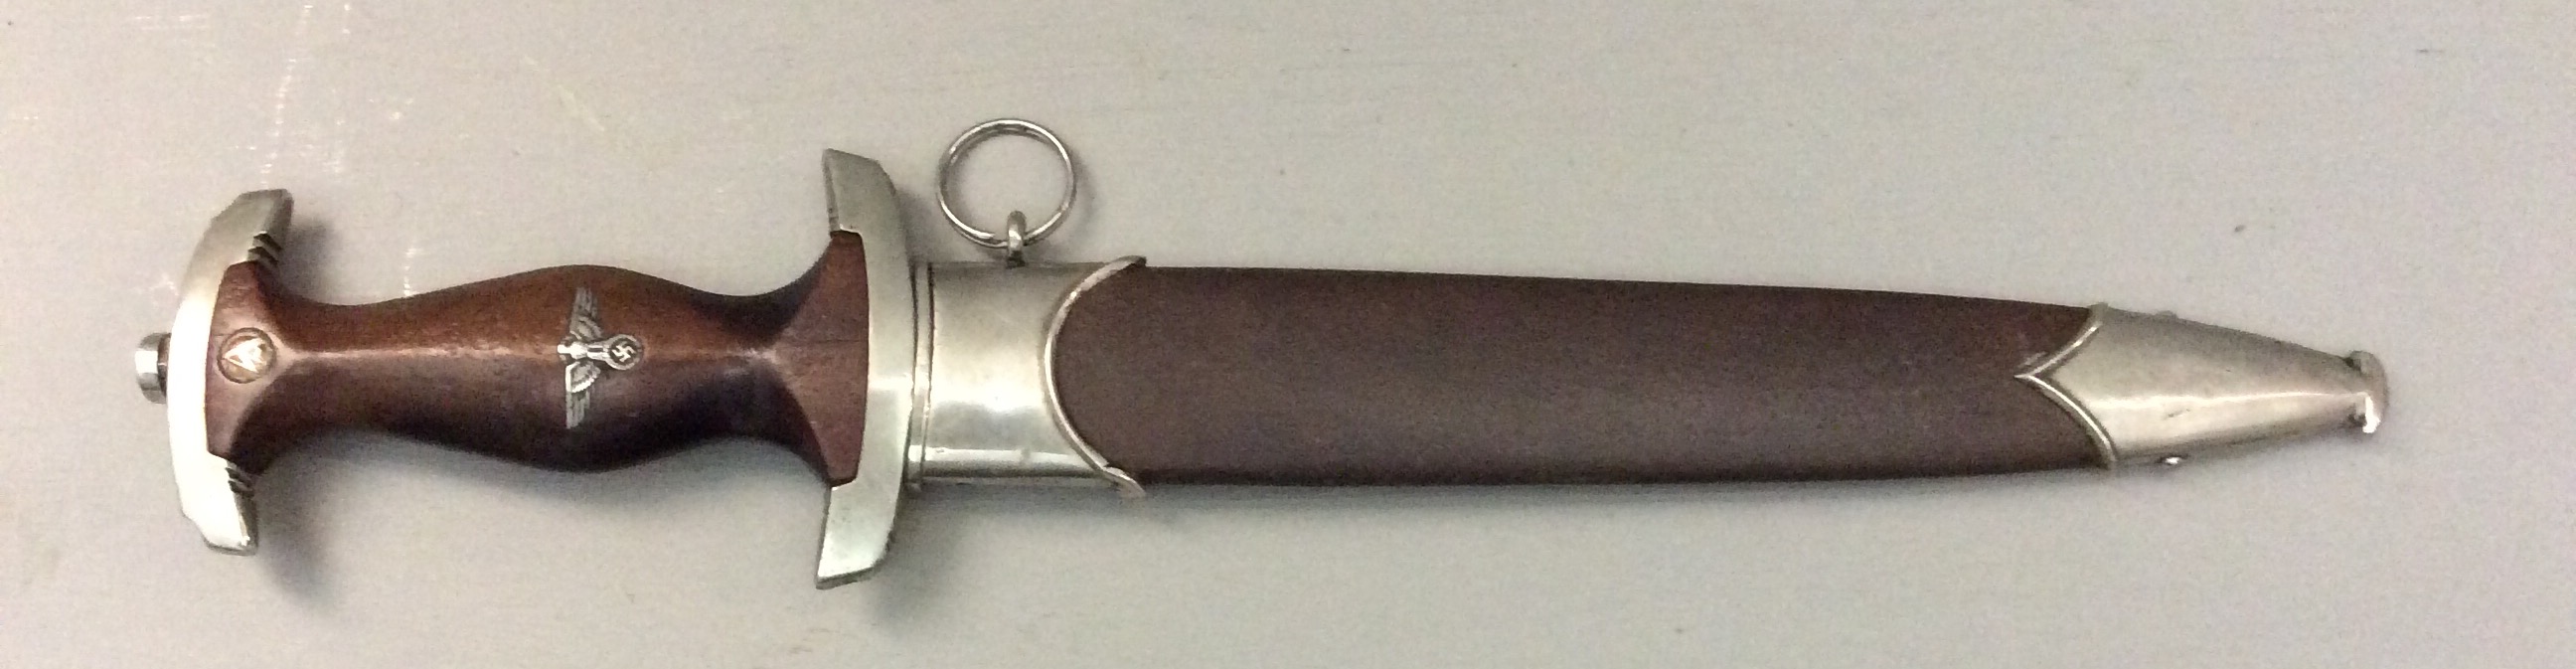 A WORLD WAR II GERMAN SA DAGGER Brown wooden grip with solid nickel fittings and brown leather - Image 2 of 10